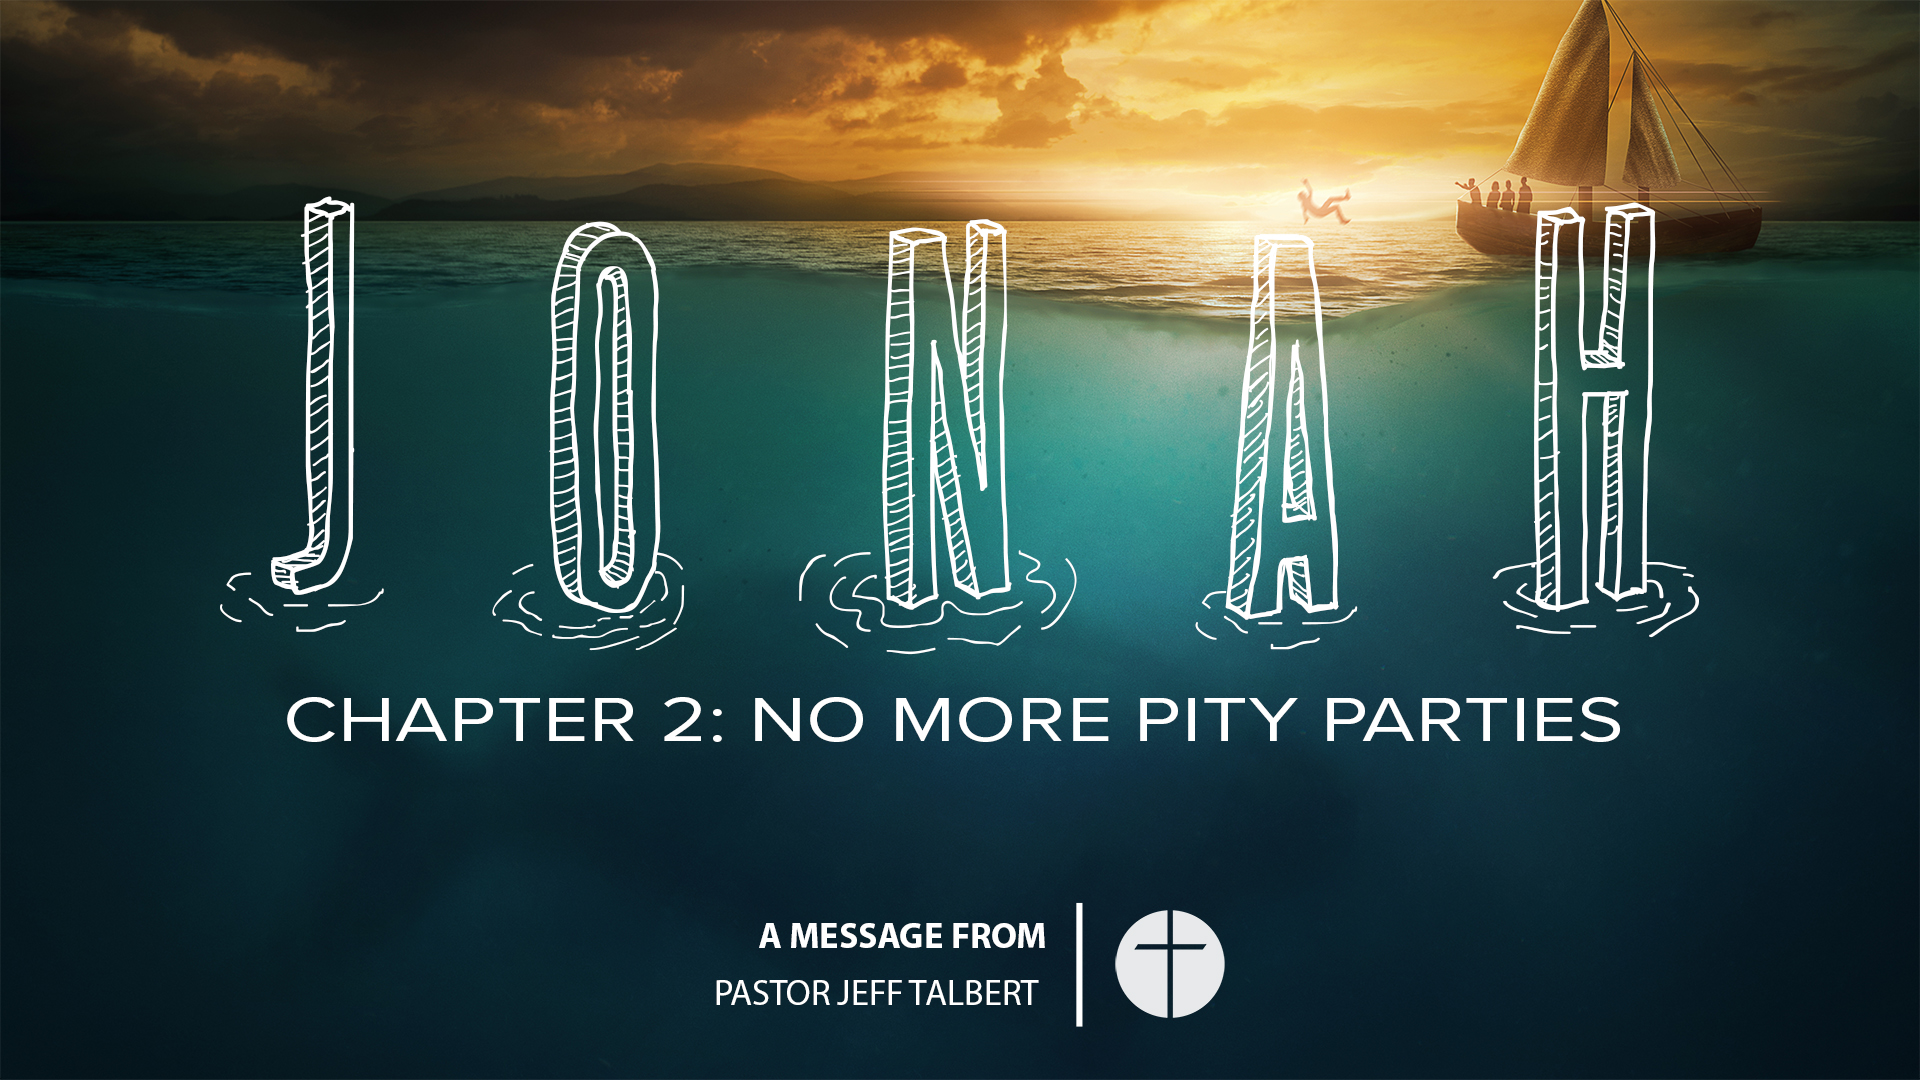 Jonah Chapter 2: No More Pity Parties Image